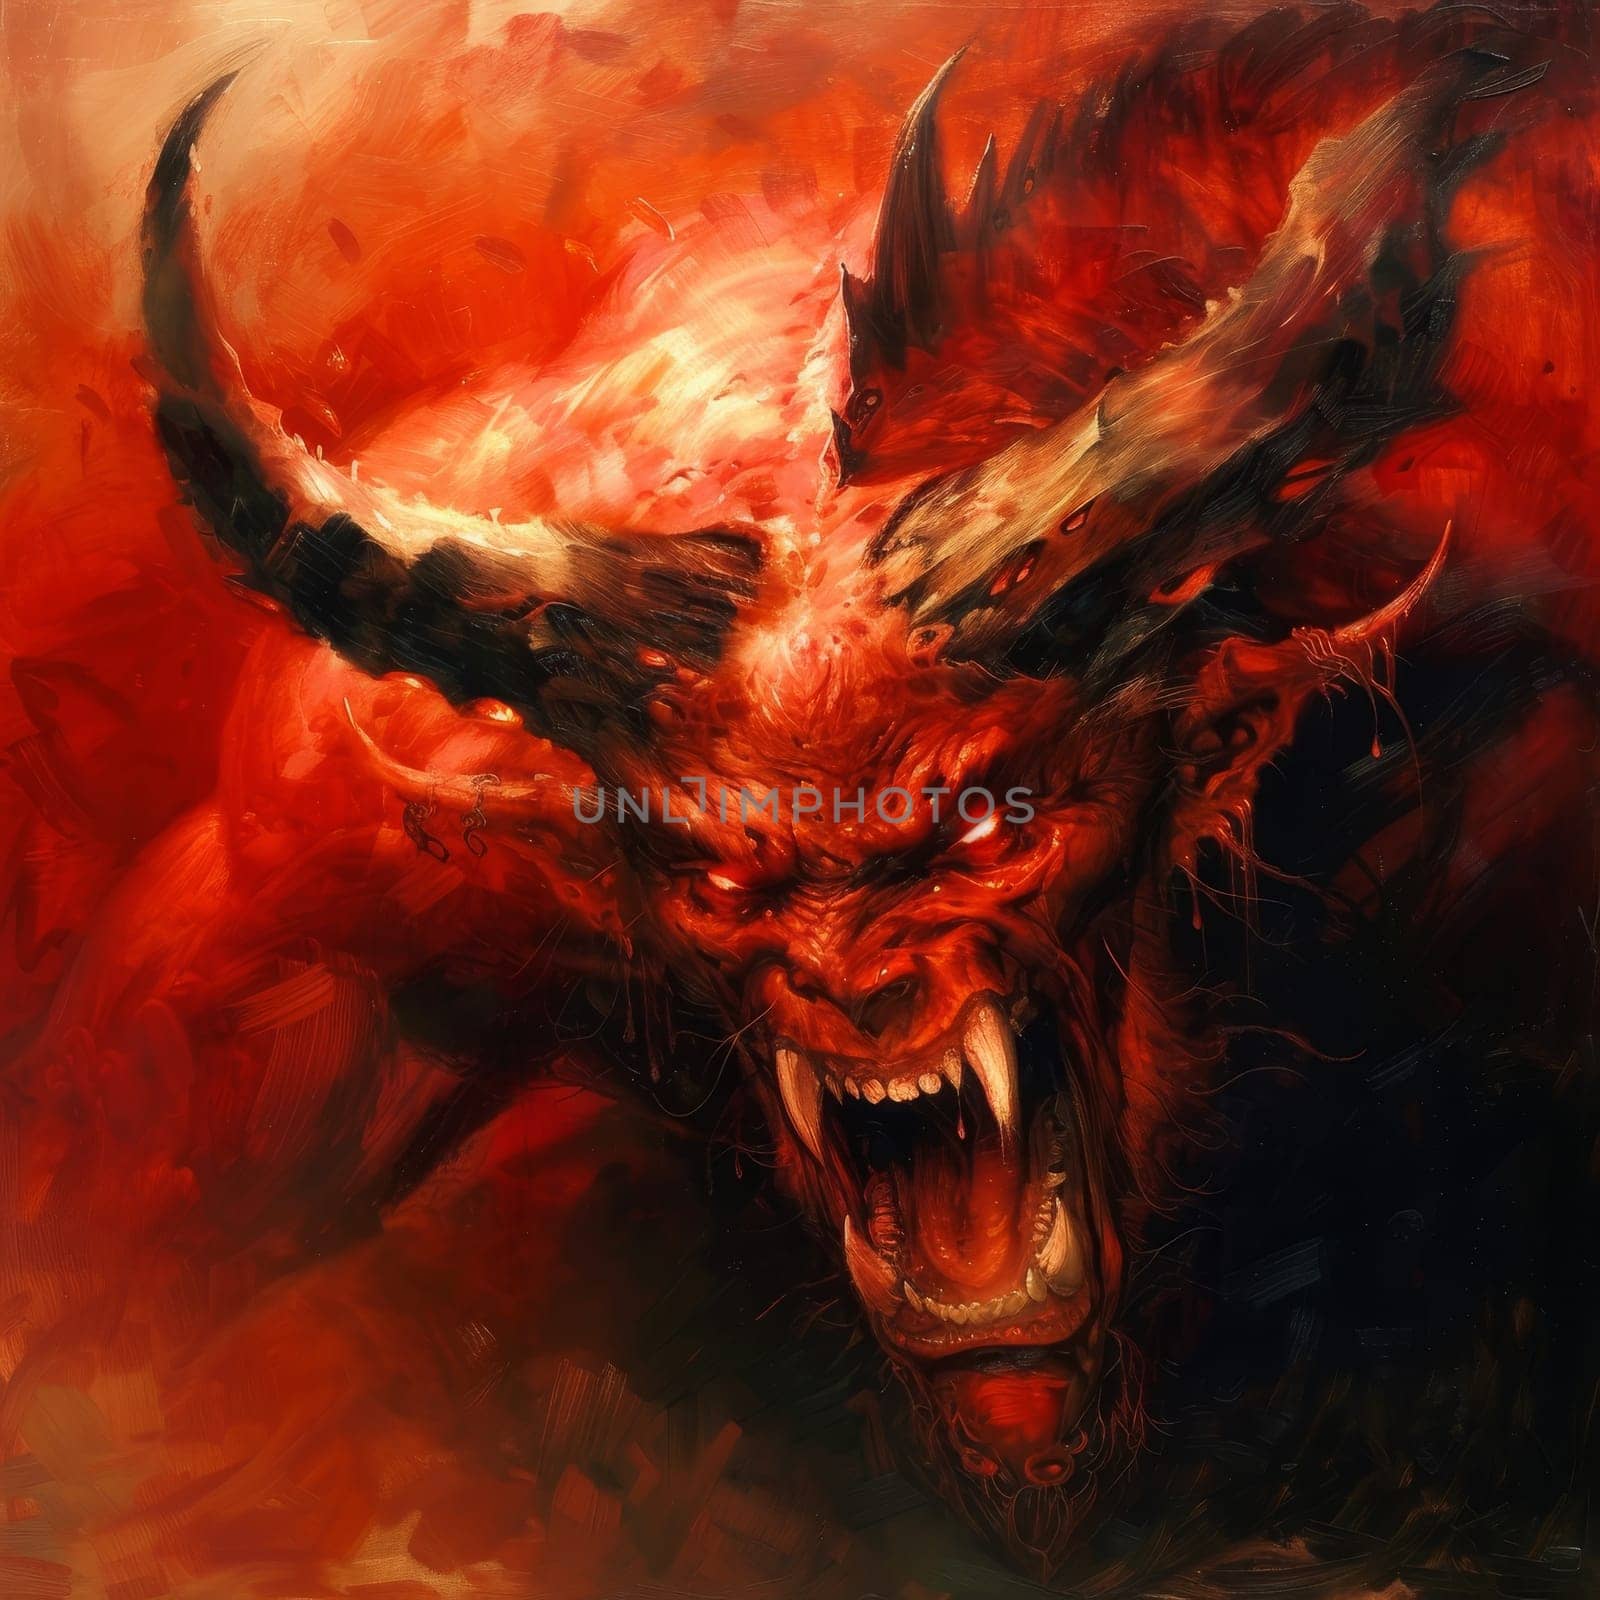 Artistic depiction of a fierce red demon with glaring eyes and large horns. by sfinks